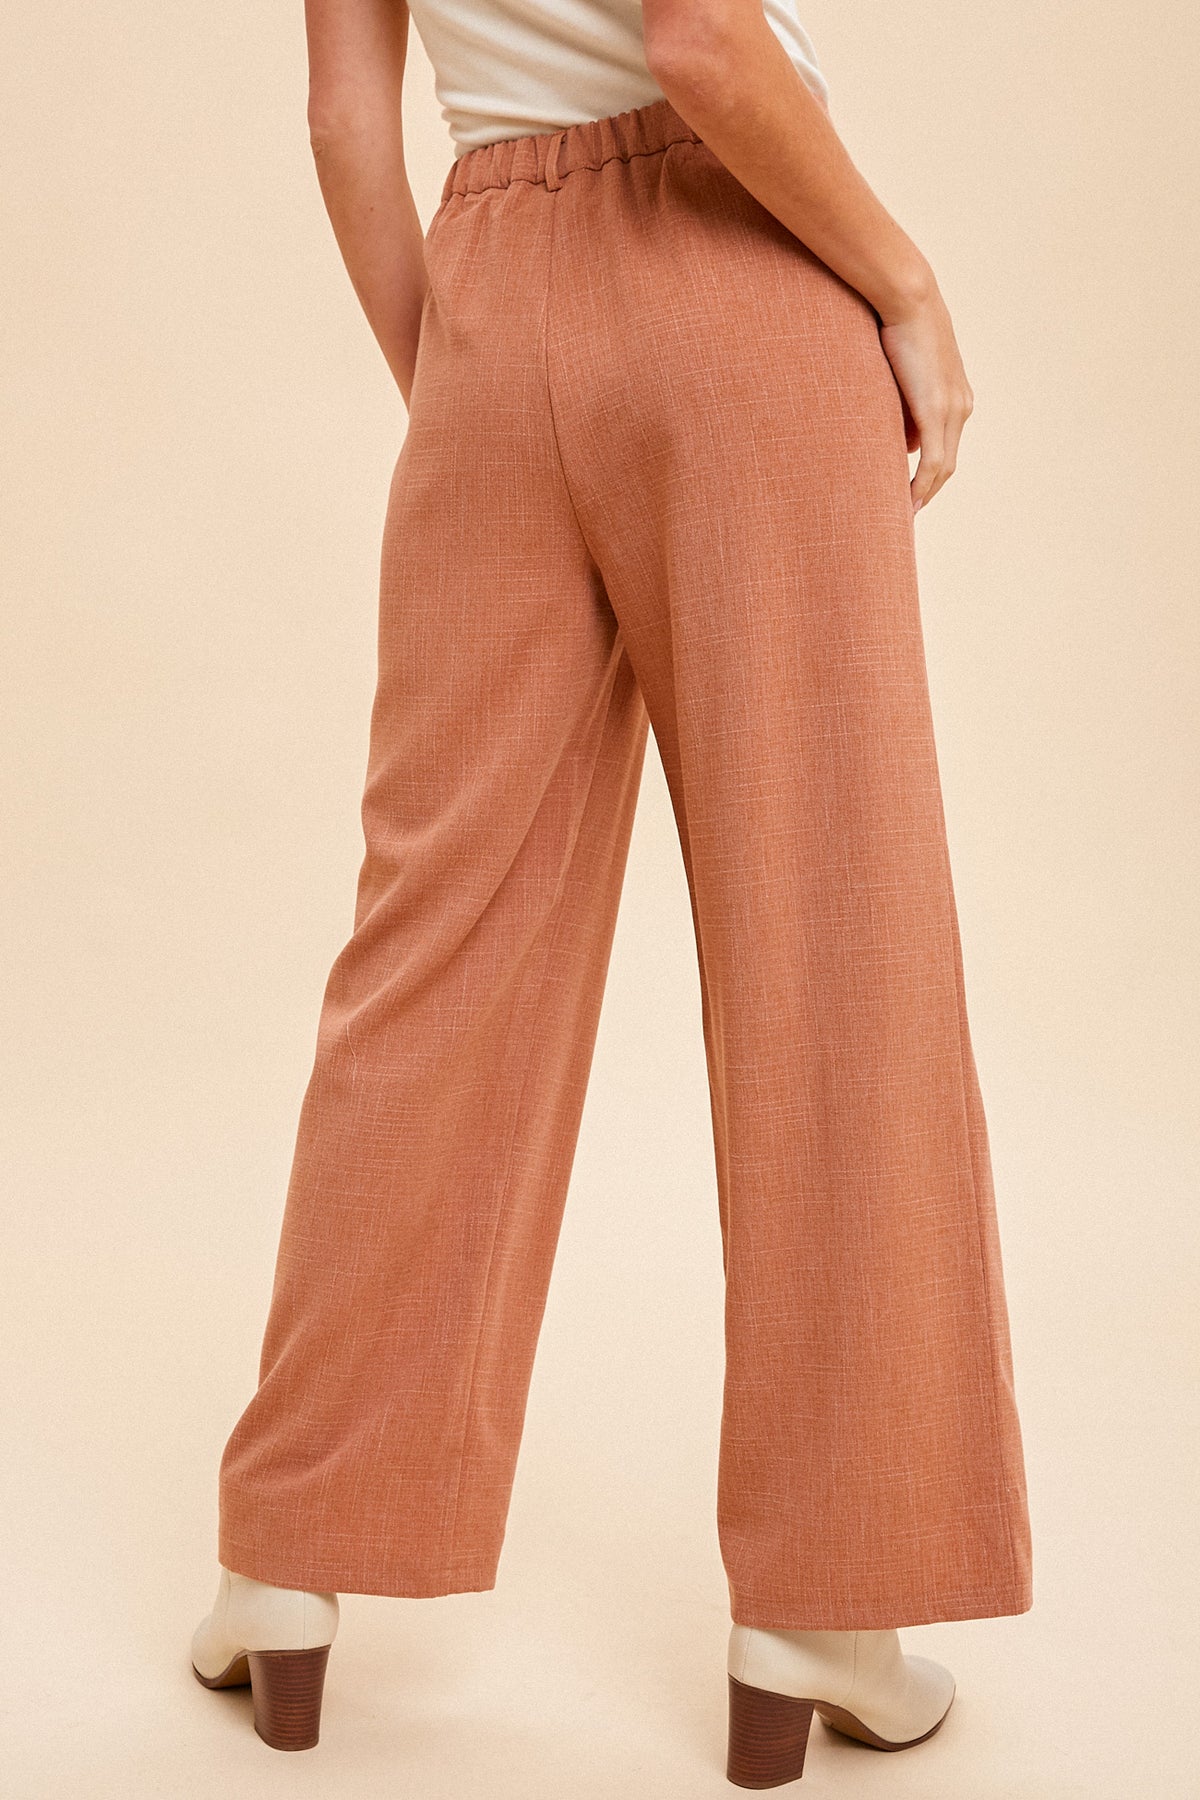 Back In Business Pants - Teracotta